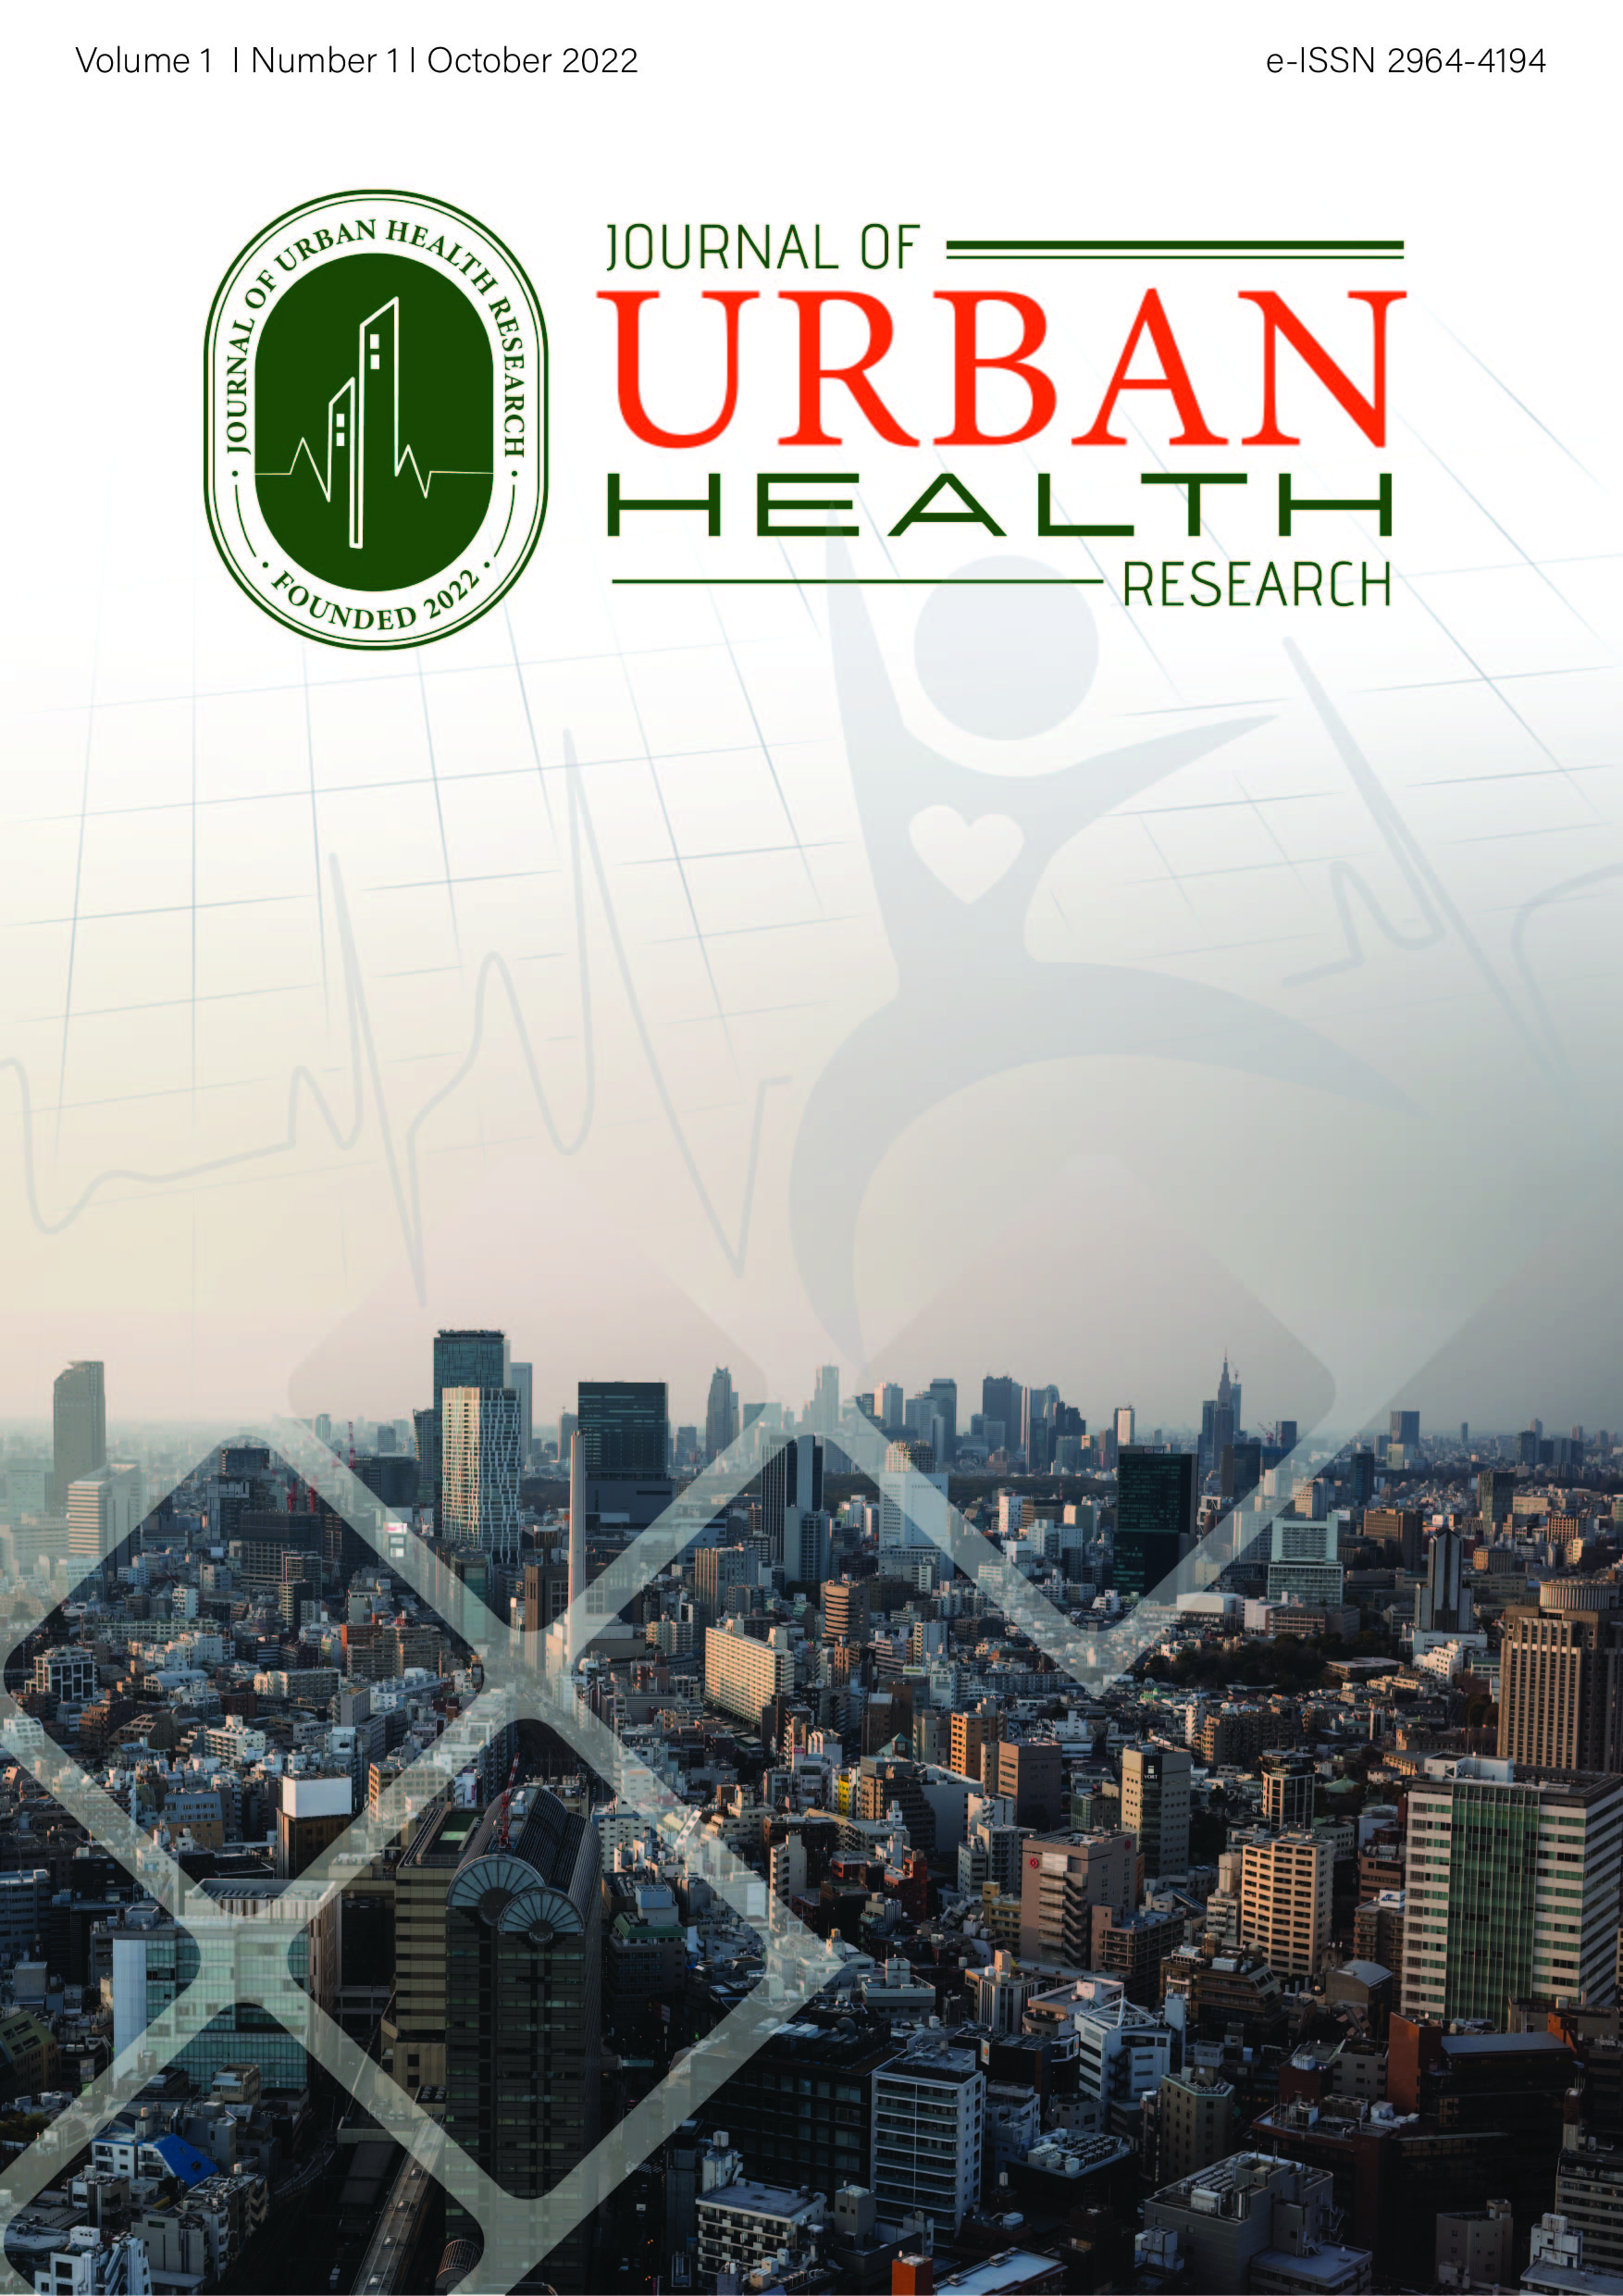 Journal of Urban Health Research